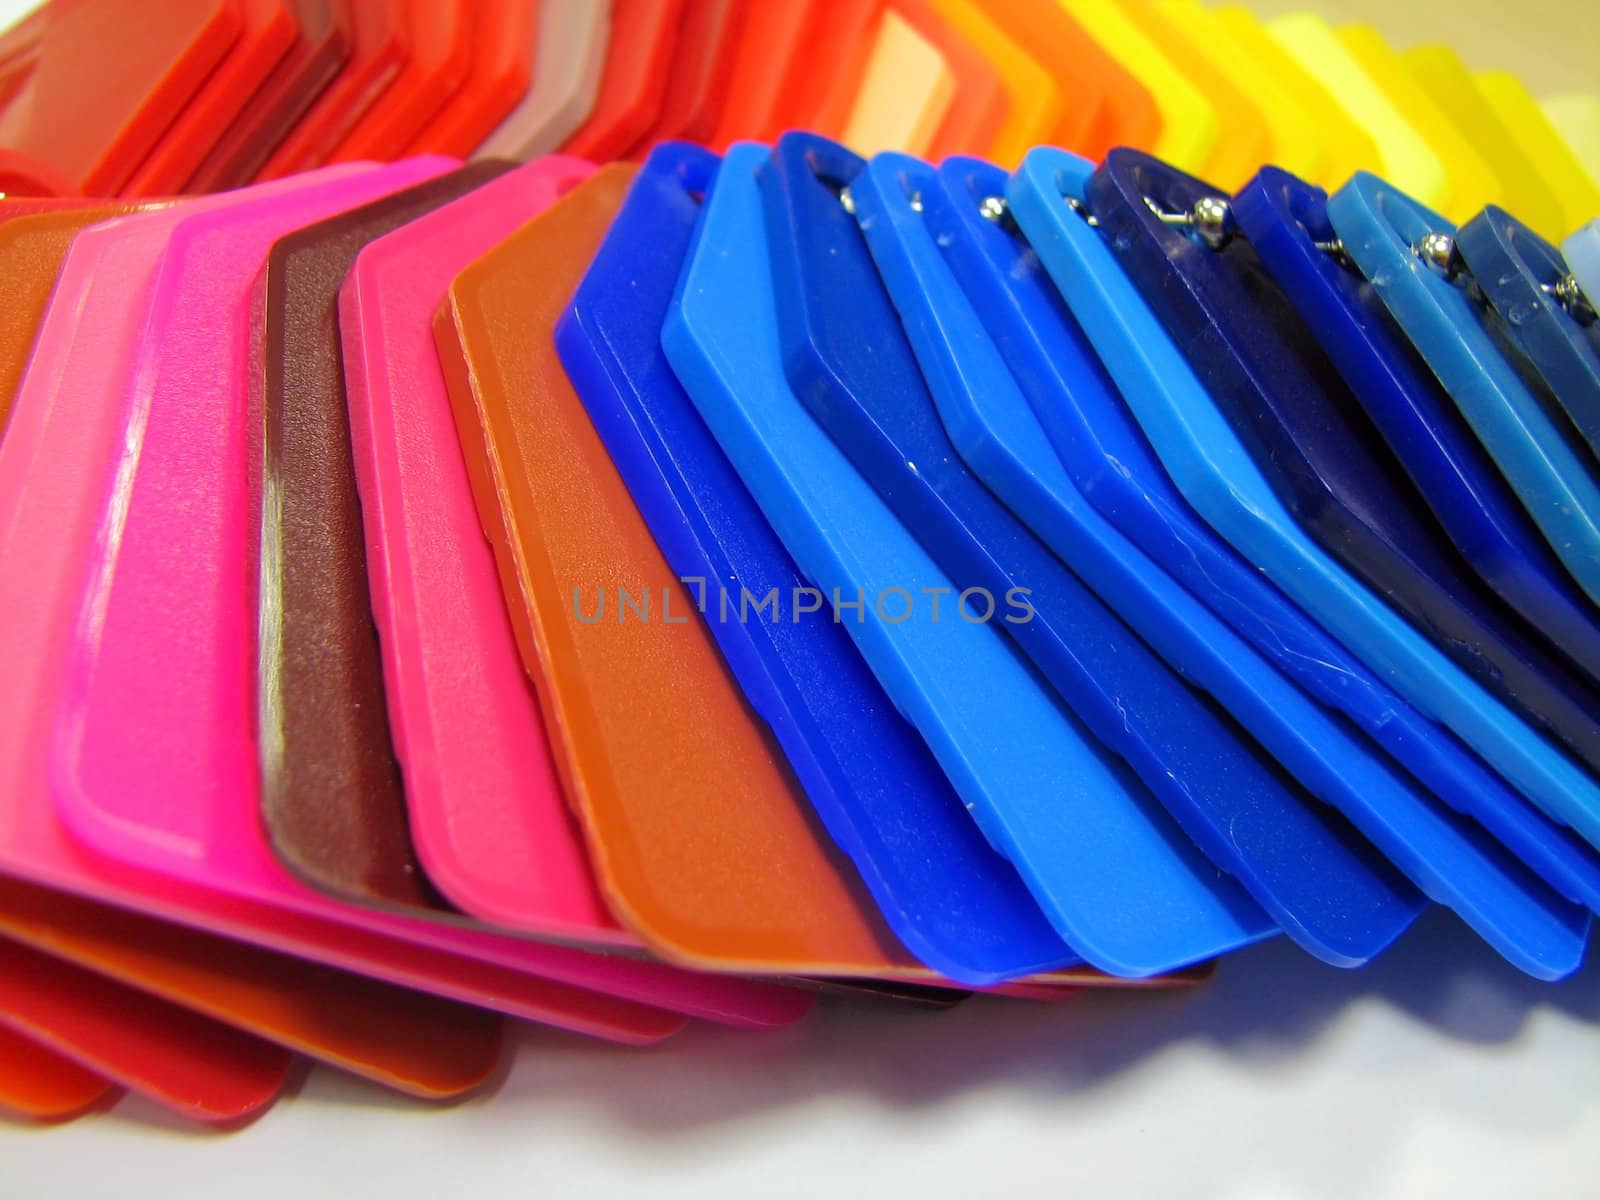 plastic color samples by vadimone